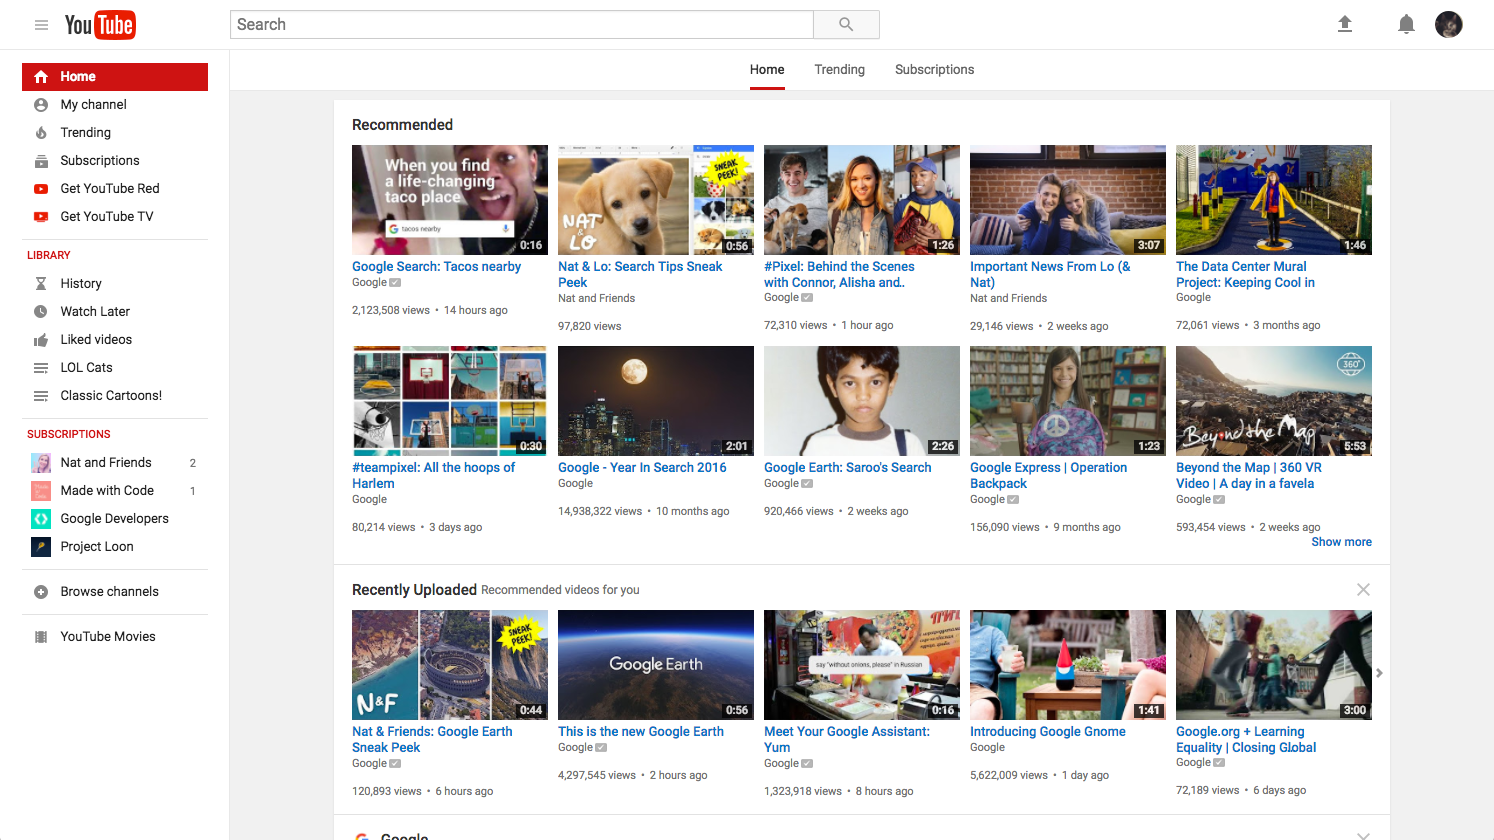 YouTube revamps its desktop site with an updated design, optional dark